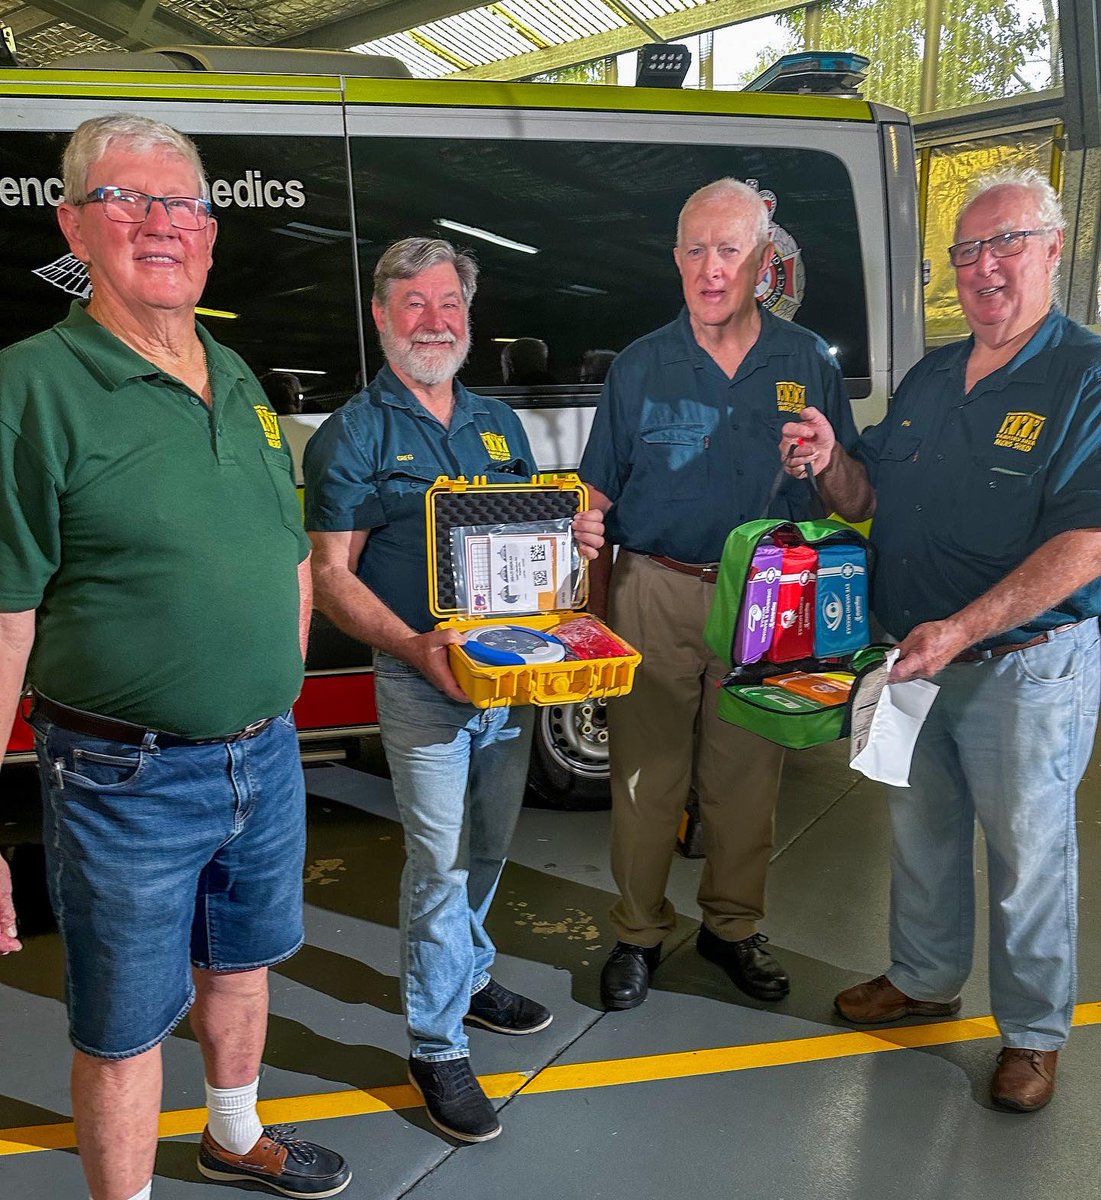 Peter Schinkel has been reunited with the paramedics who saved his life. In December 2023, Peter collapsed into cardiac arrest at the Samford Area Mens’ Shed. Allen Marr, a retired @QldAmbulance paramedic with 40 years of service, Phil and Greg immediately jumped into action.